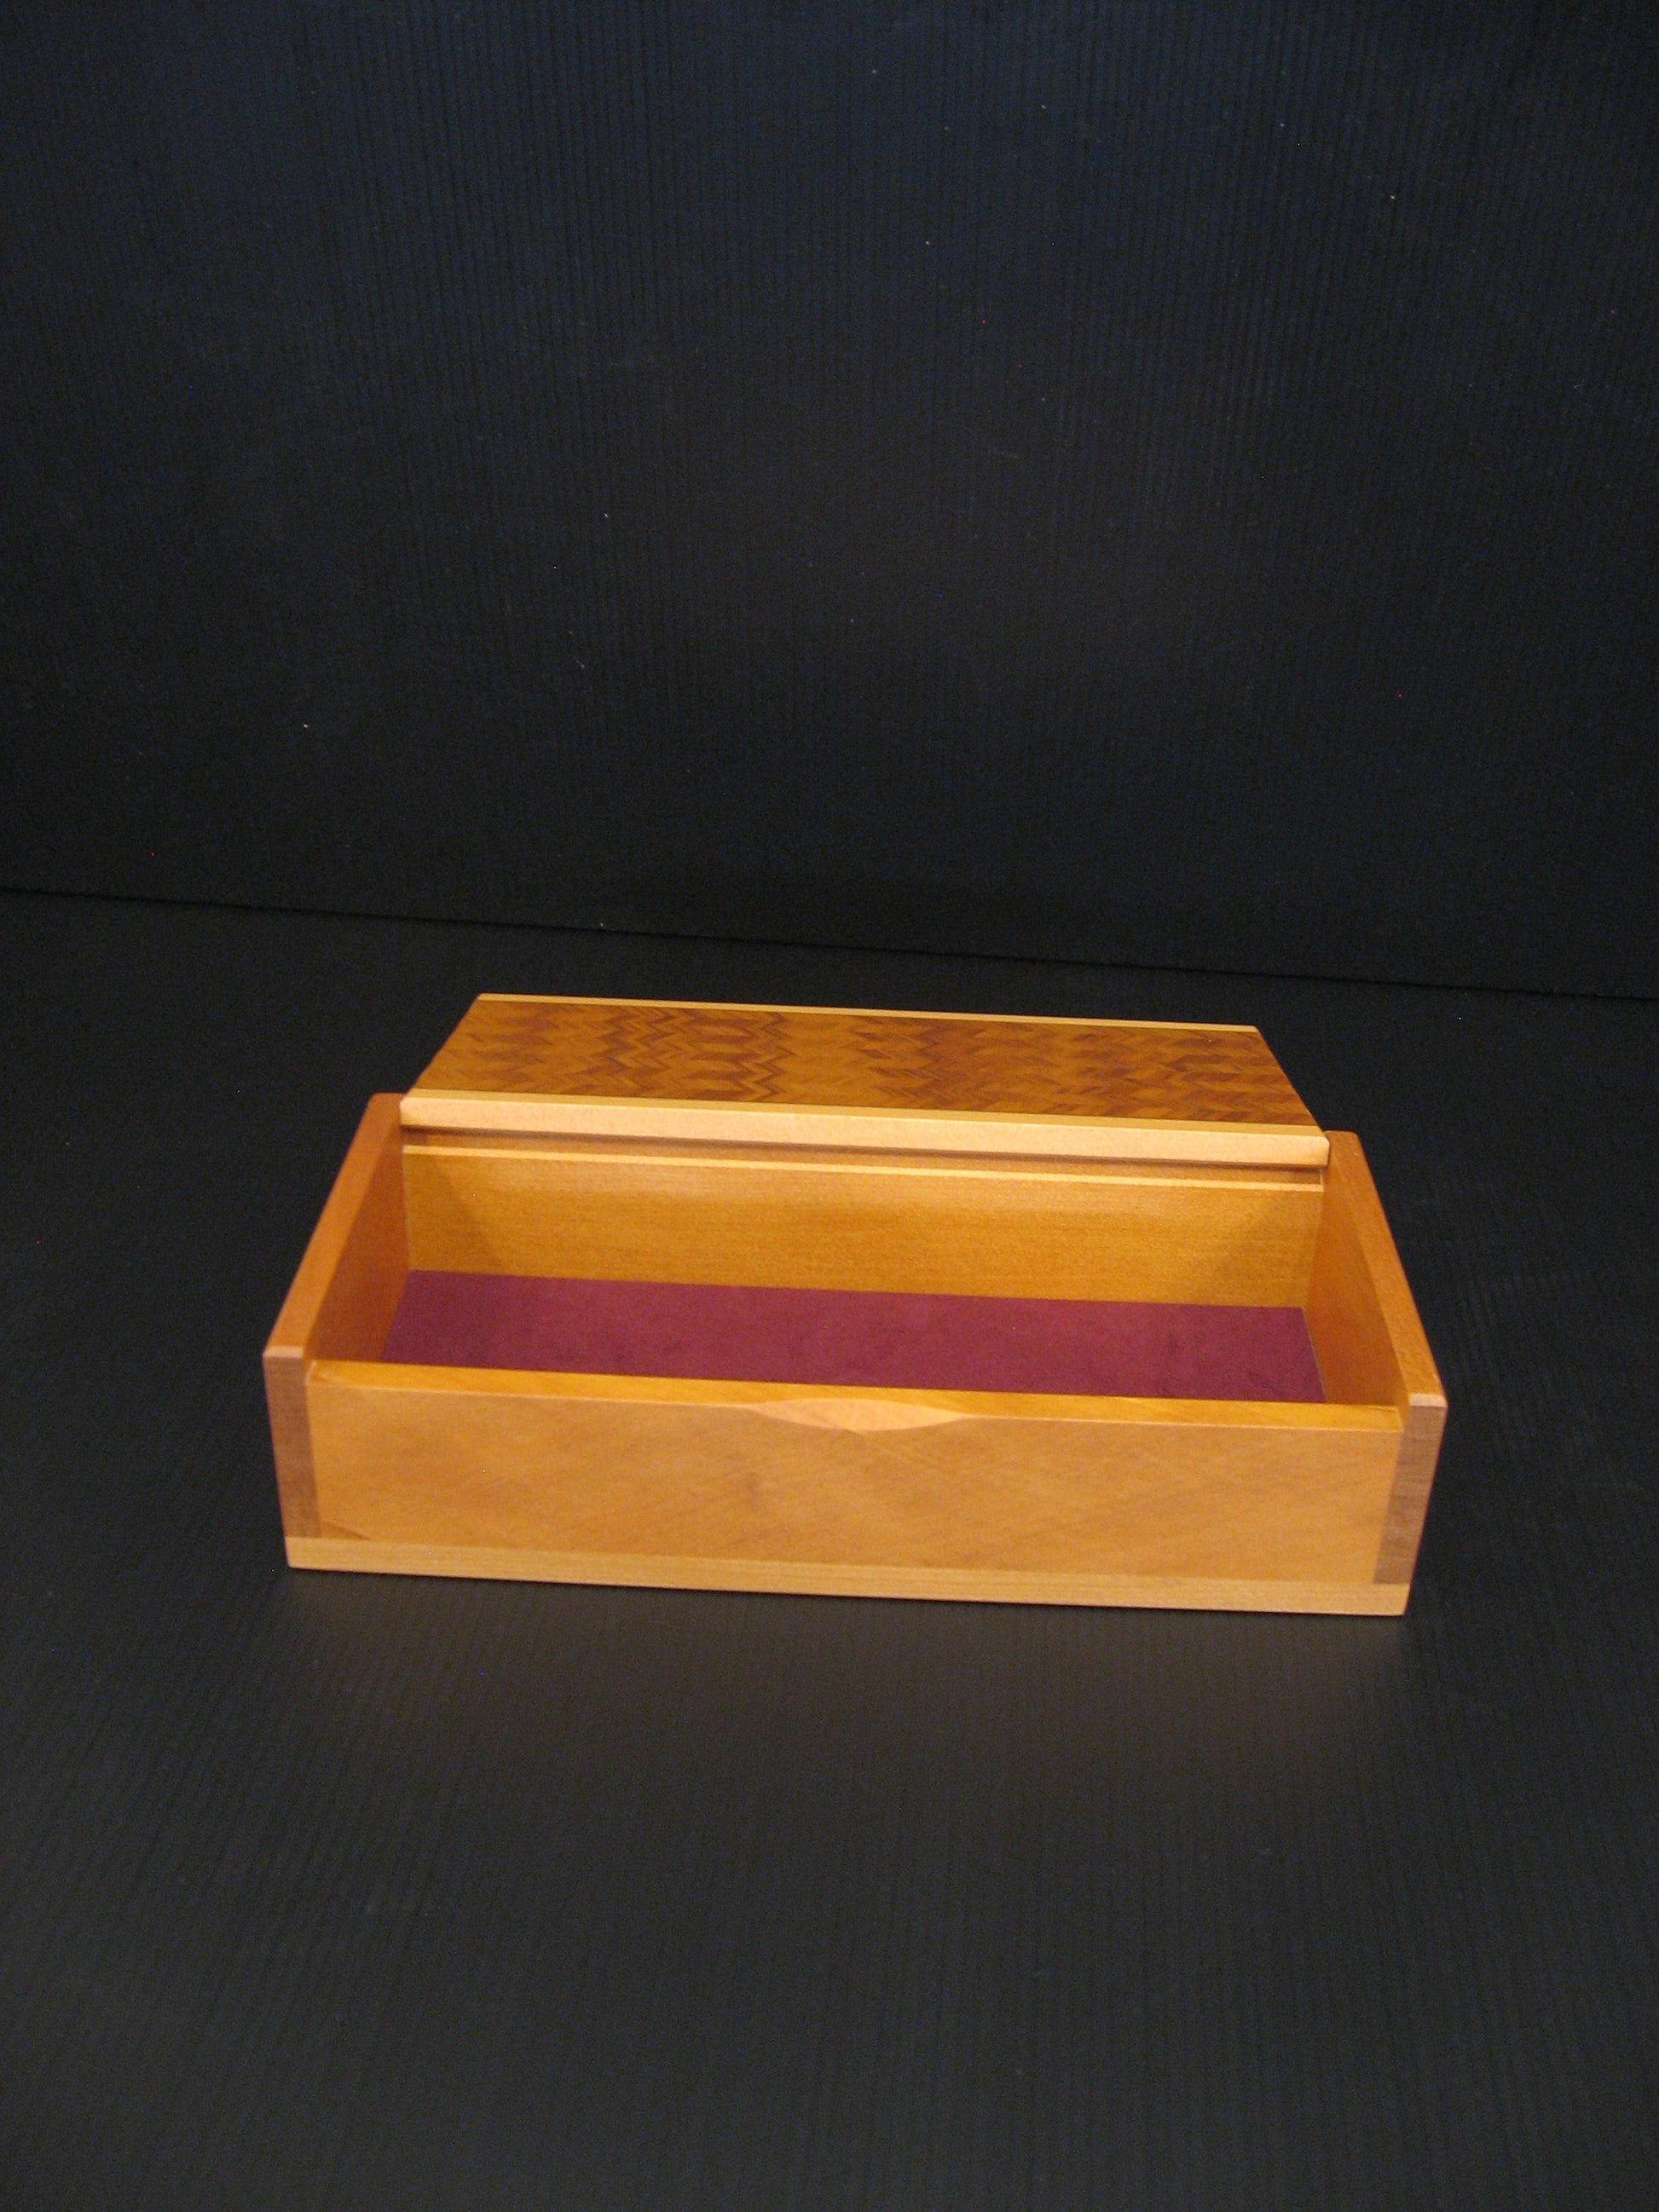 Fully opened Kauri Wooden Zigzag Patterned Jewellery Box by Timber Arts NZ Silver Fern Gallery